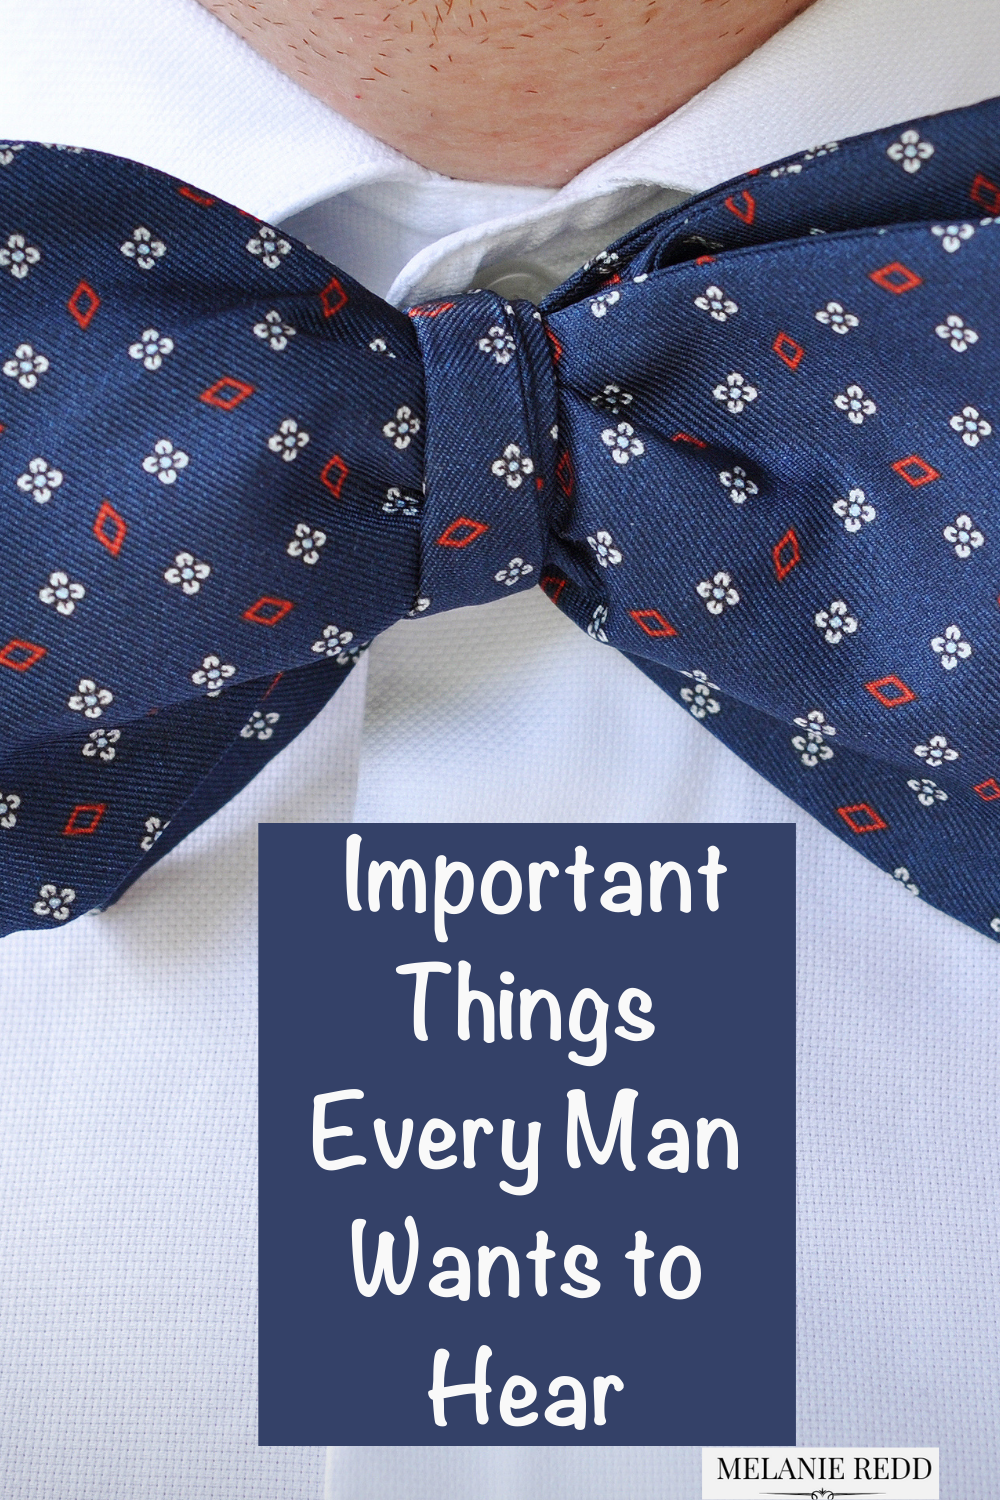 Our men love to hear certain things from us, according to my very wise husband. What are they? What do our guys want to hear from us? Here are 5 great suggestions. Why not drop by and check them out? #men #marriage #relationships 